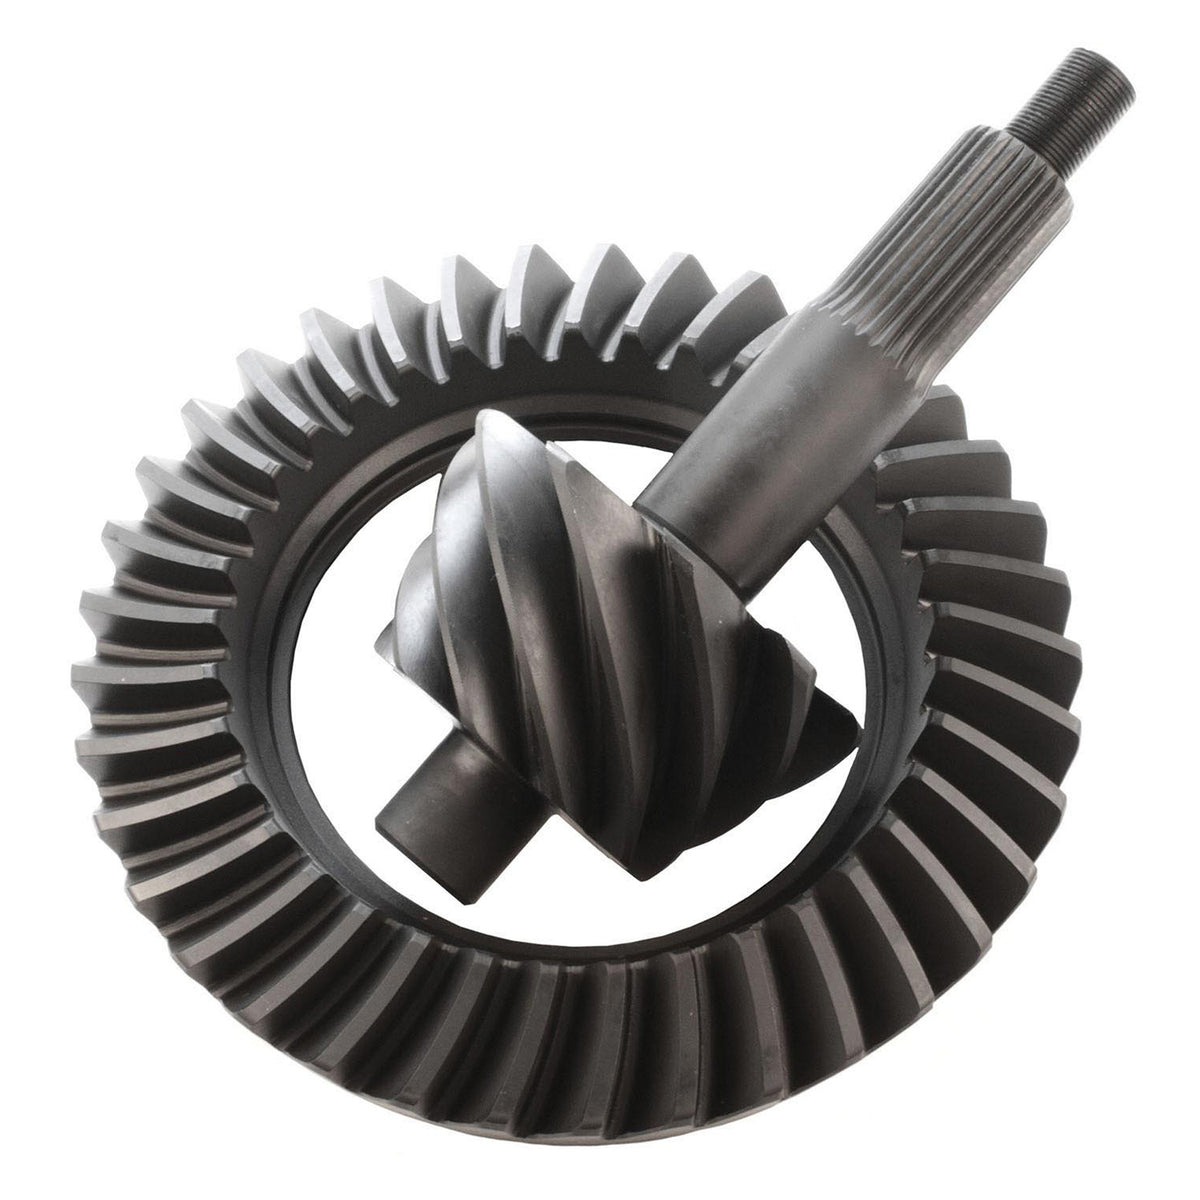 Excel Ring & Pinion Gear Set Ford 9in 5.14 Ratio